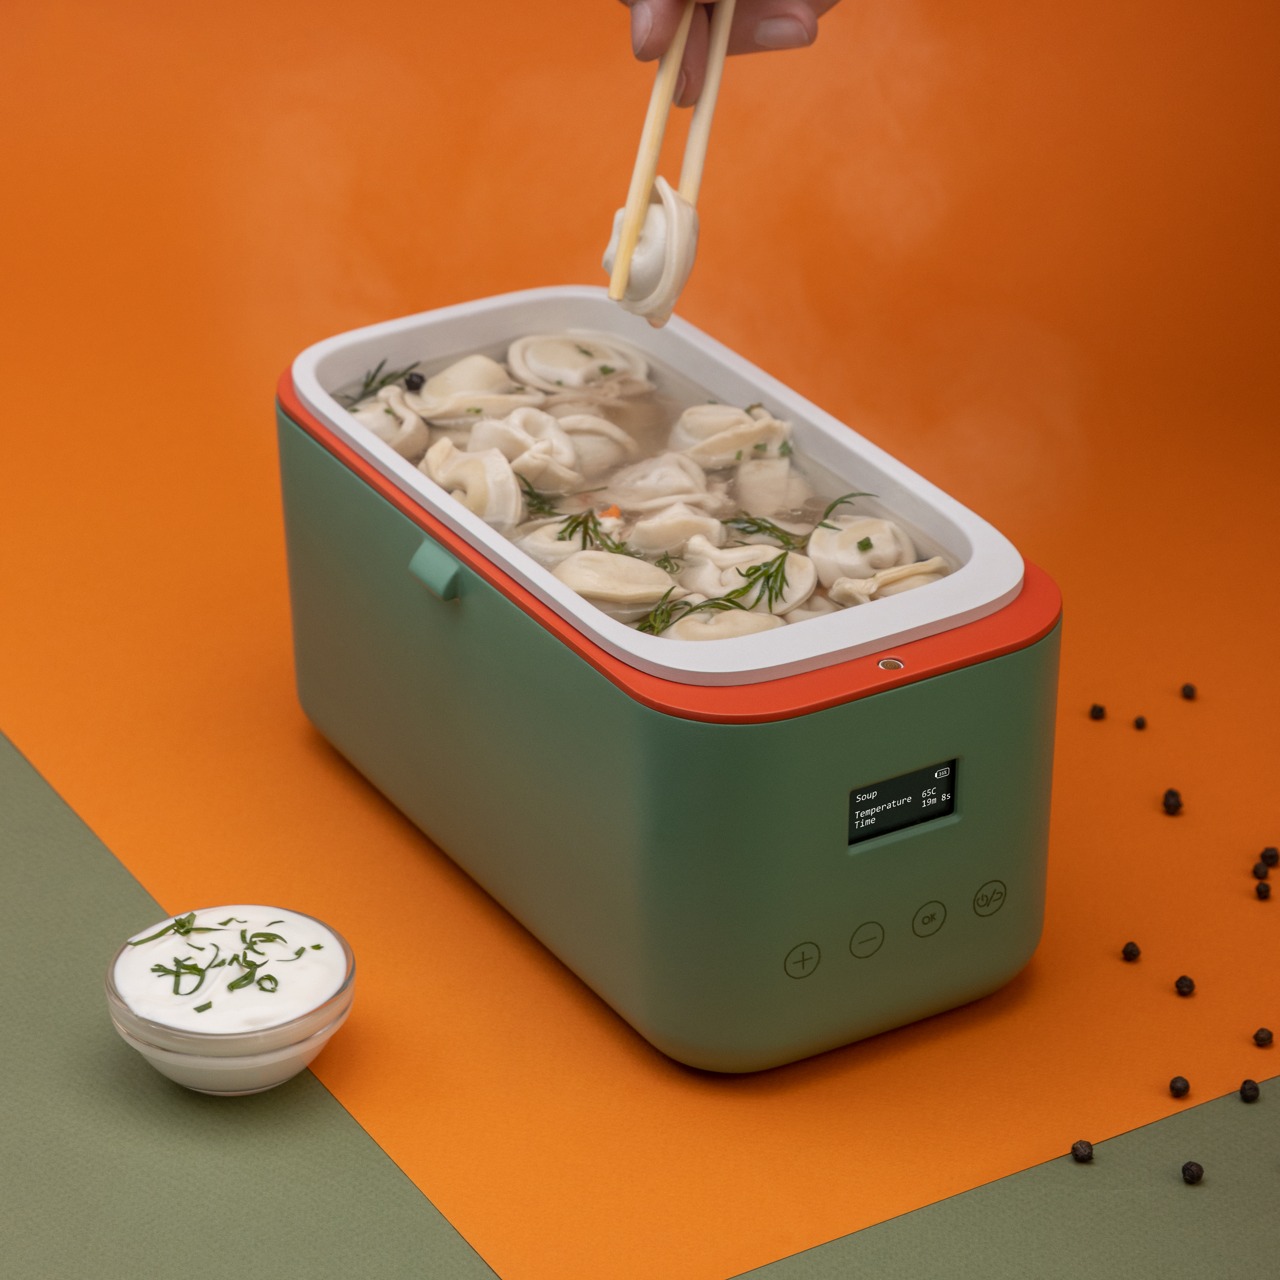 Durable And Efficient electric hot case for food 